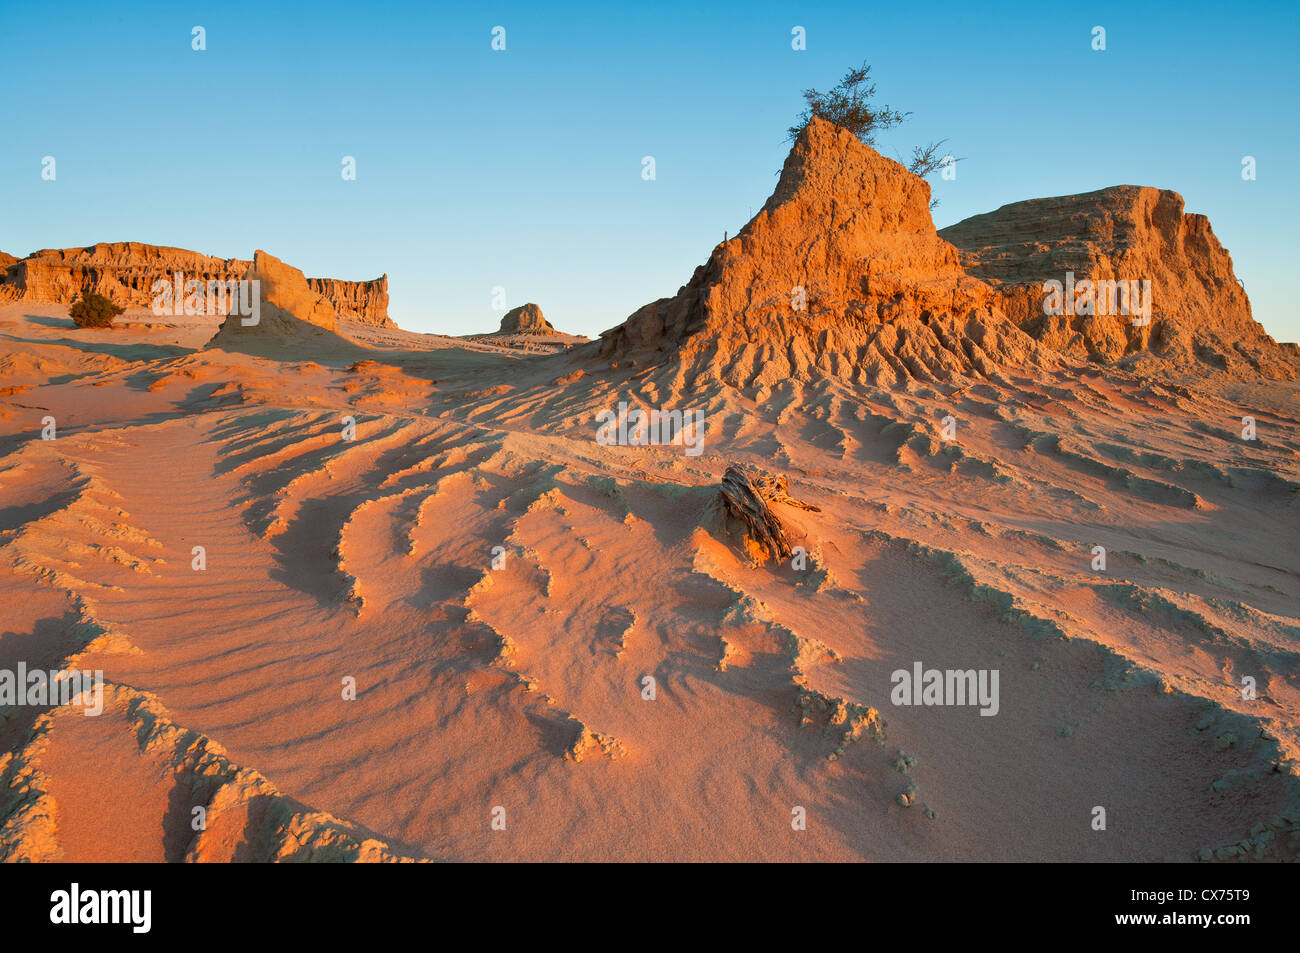 Sand dunes of the Walls of China in Mungo National Park. Stock Photo